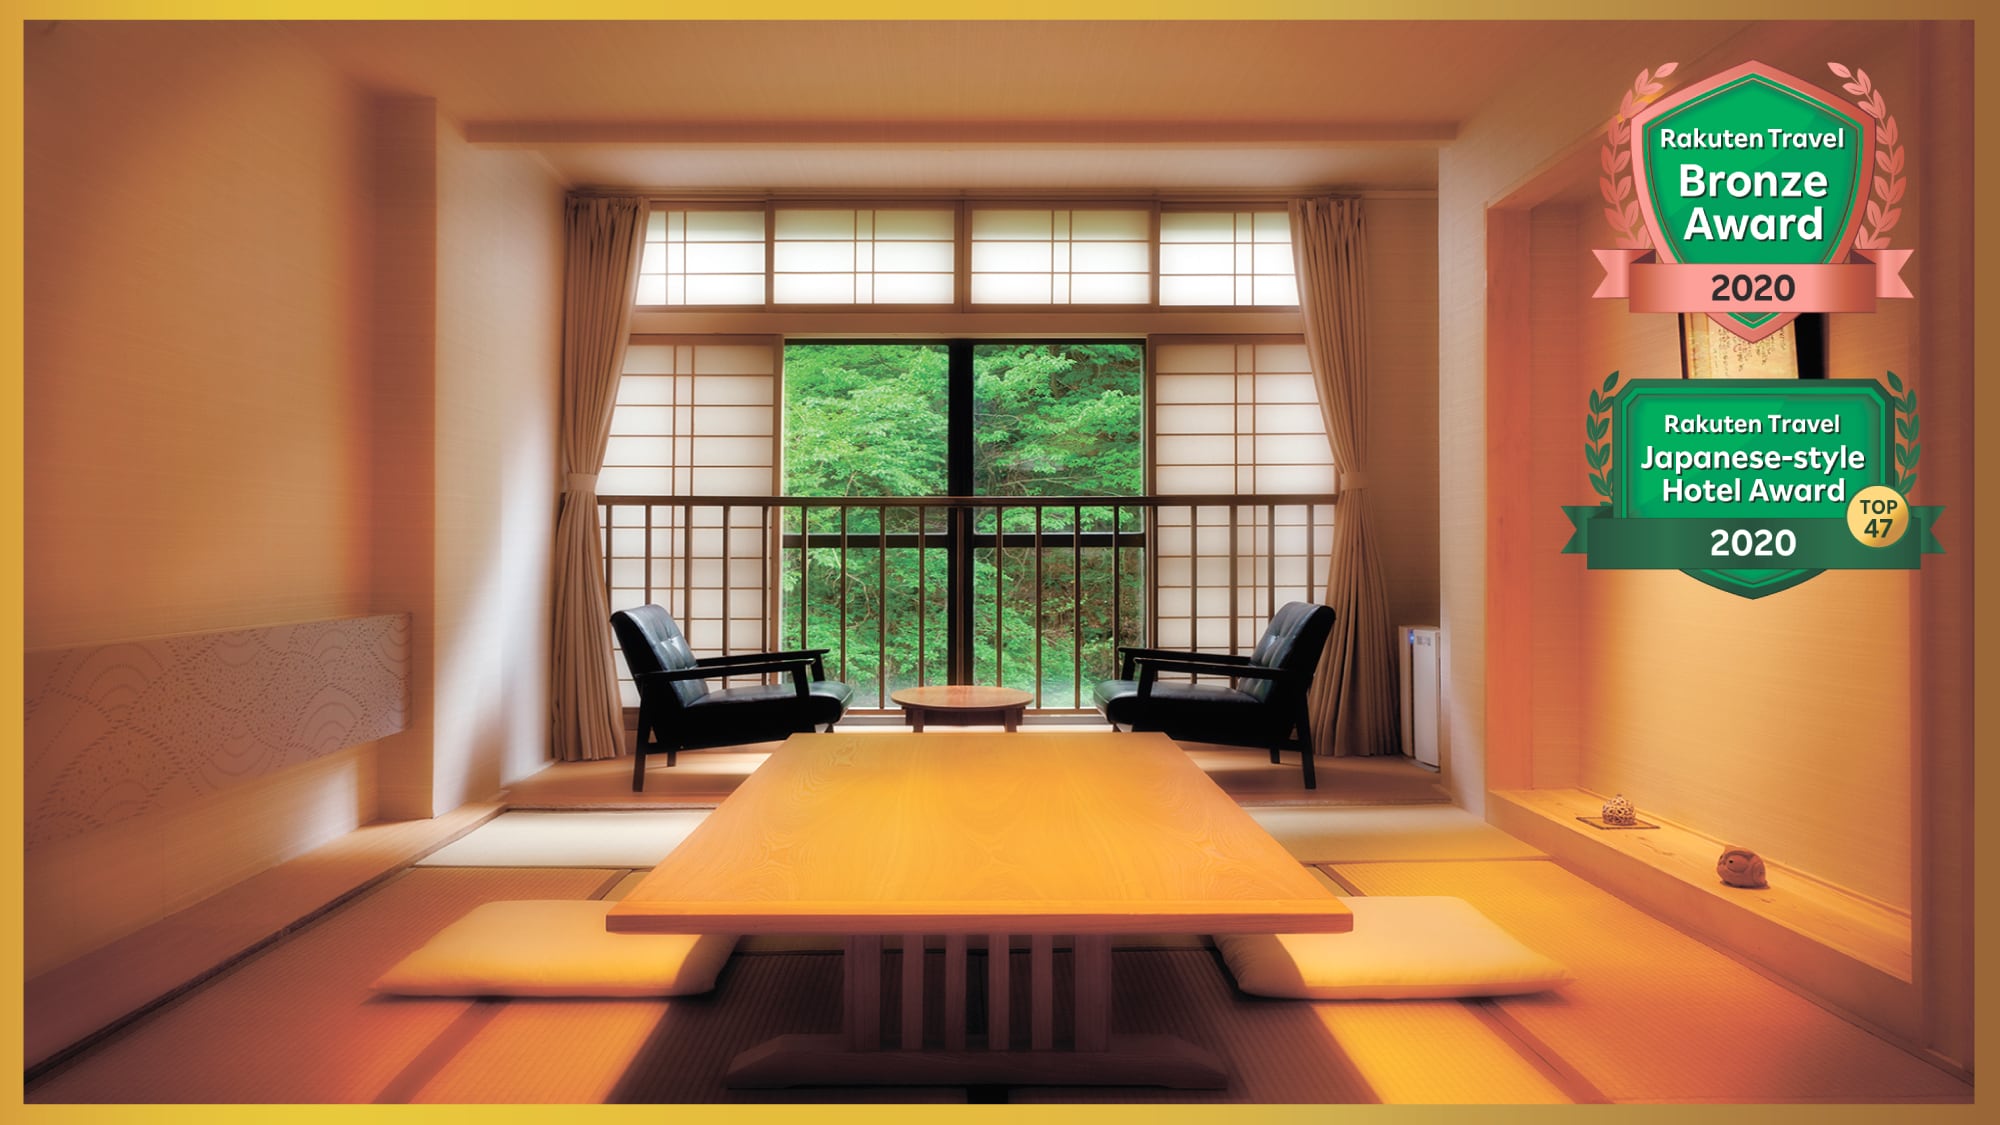 An example of a general guest room "Yumemitei" ♪ The view and floor plan vary from room to room ♪